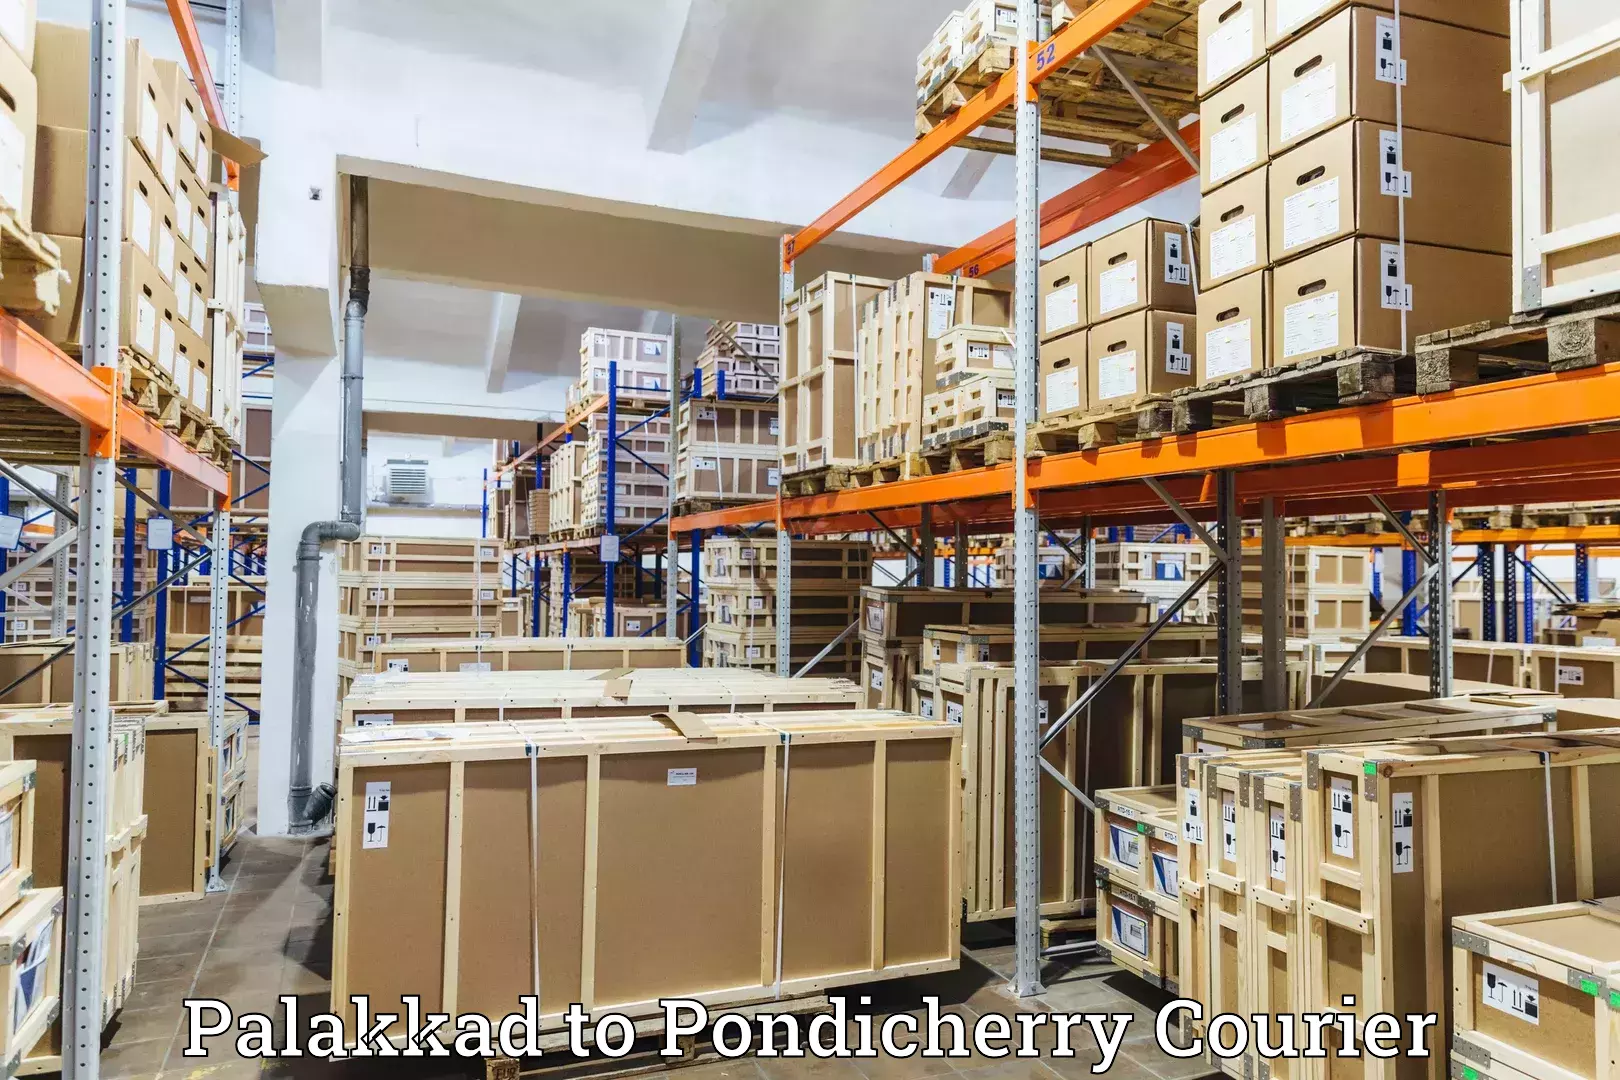 Supply chain efficiency in Palakkad to Pondicherry